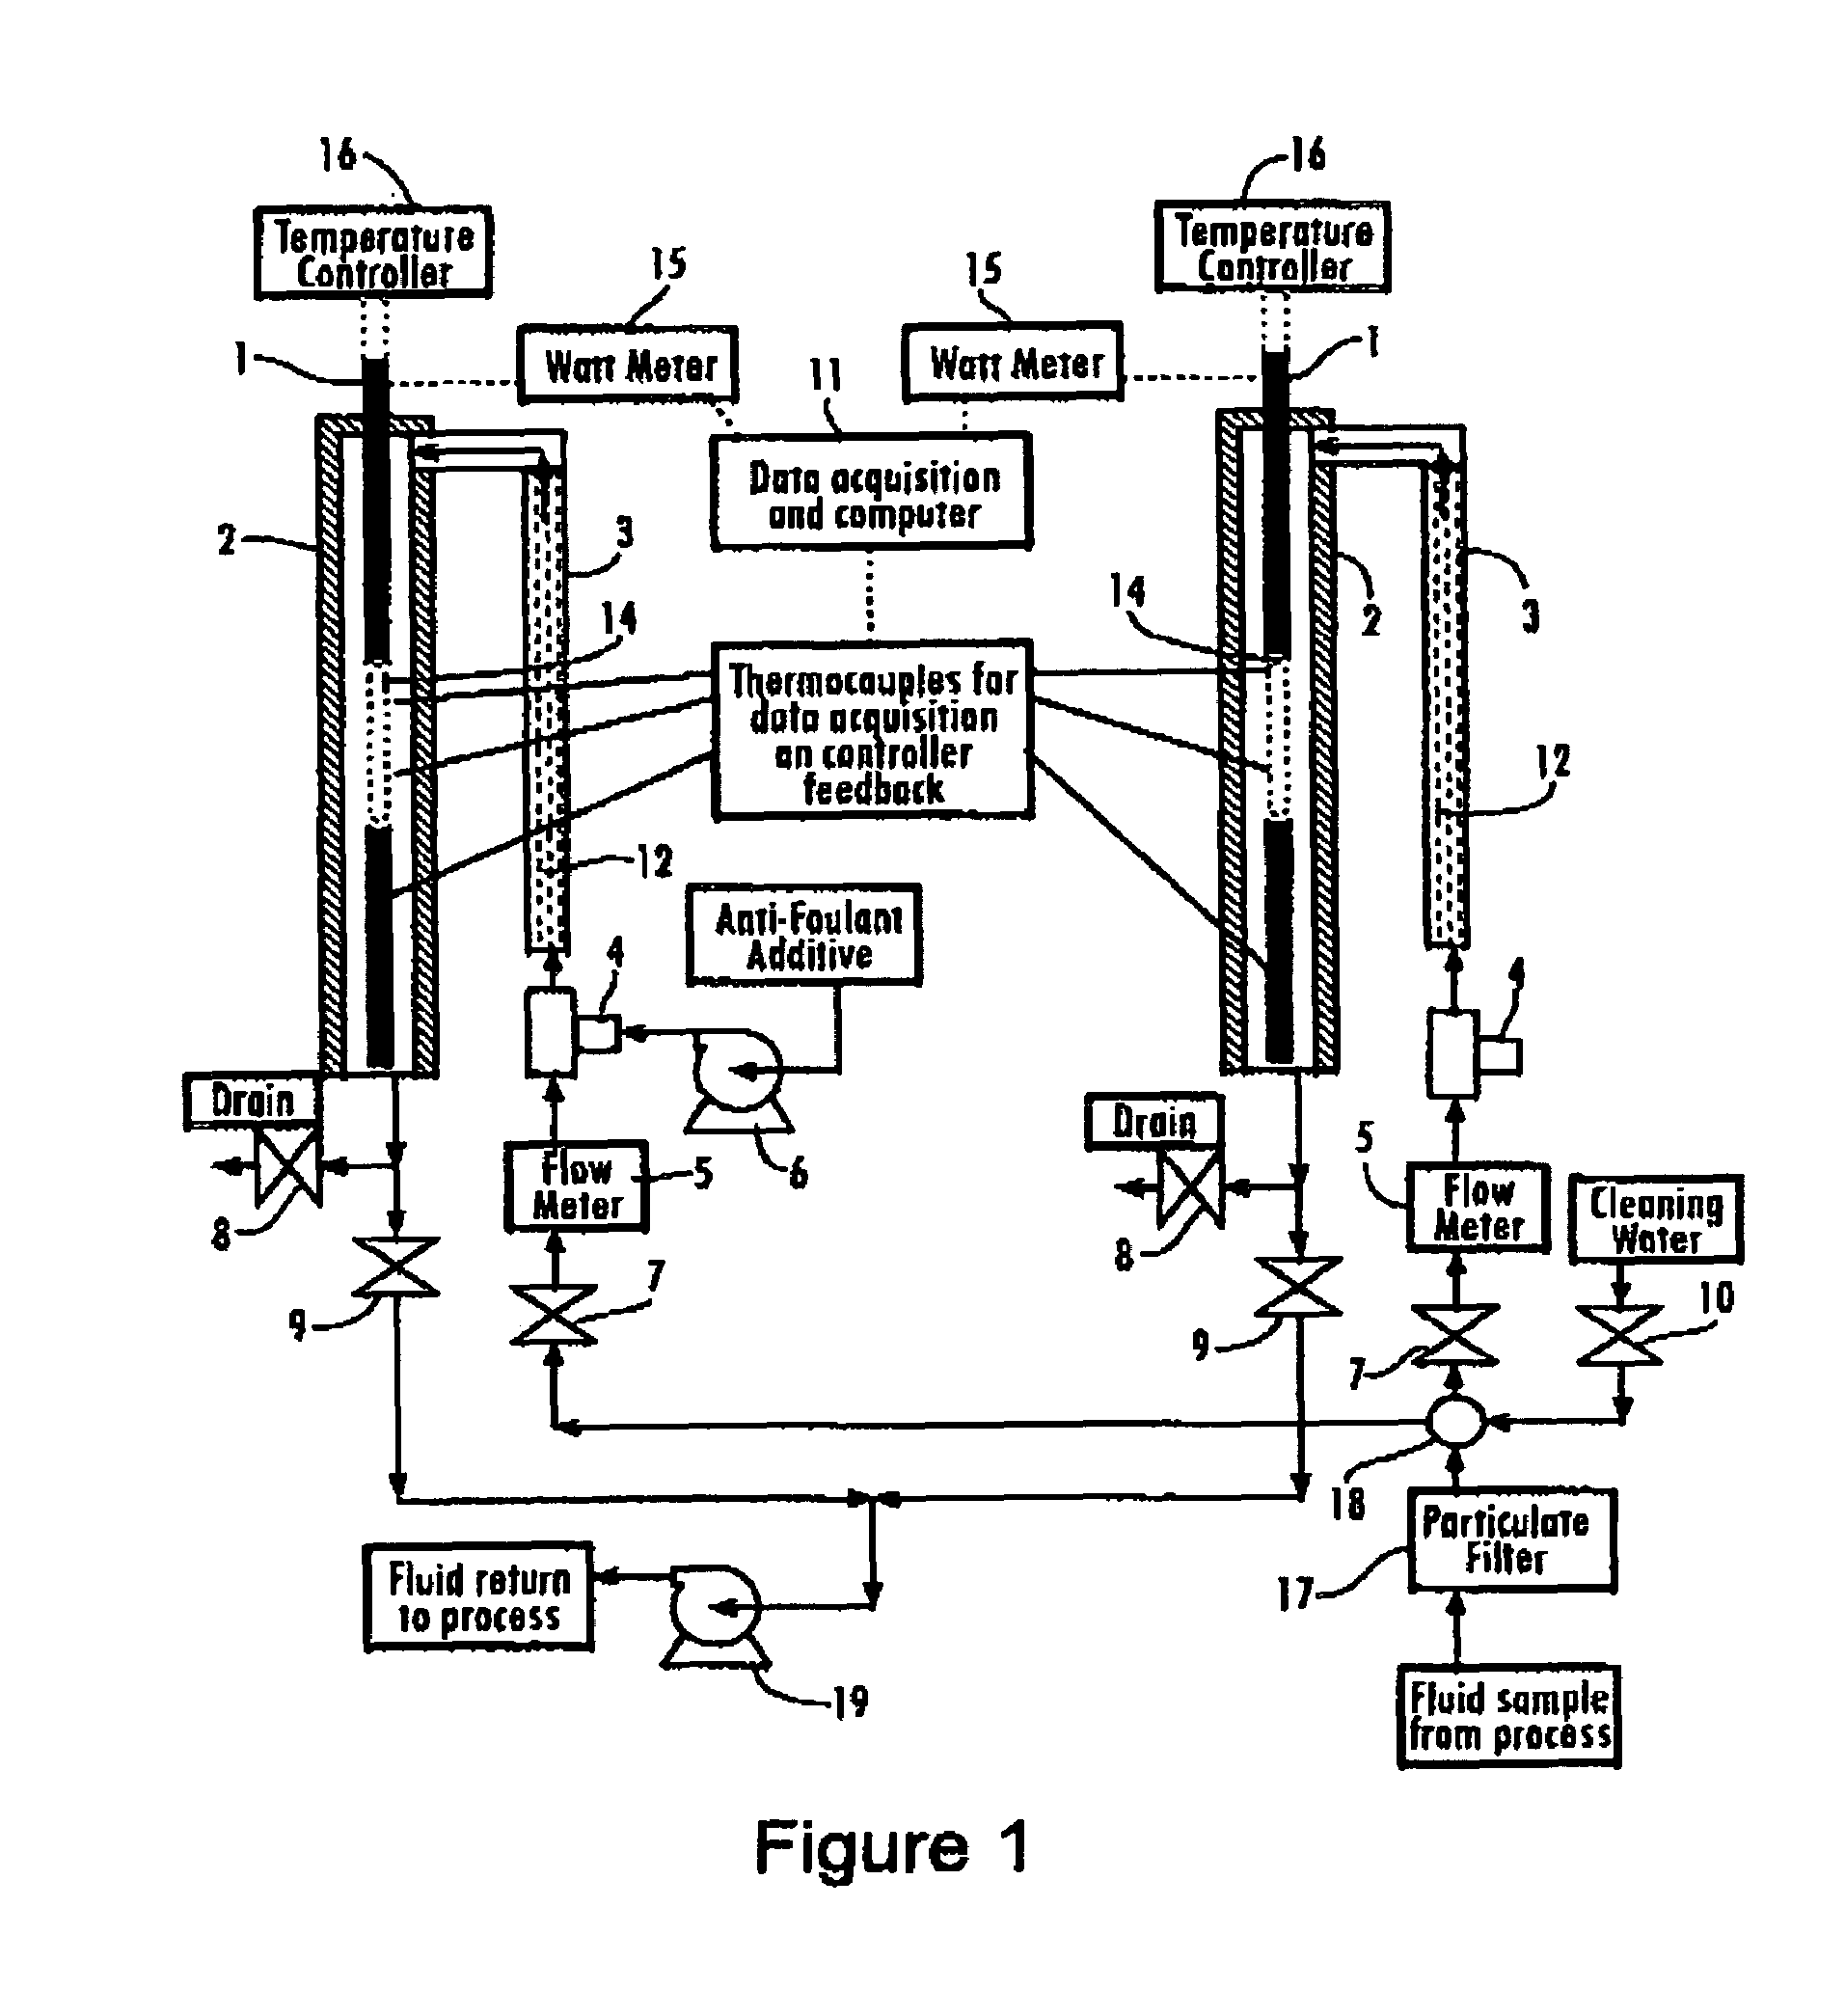 Fouling test apparatus and process for evaluation of anti-foulants